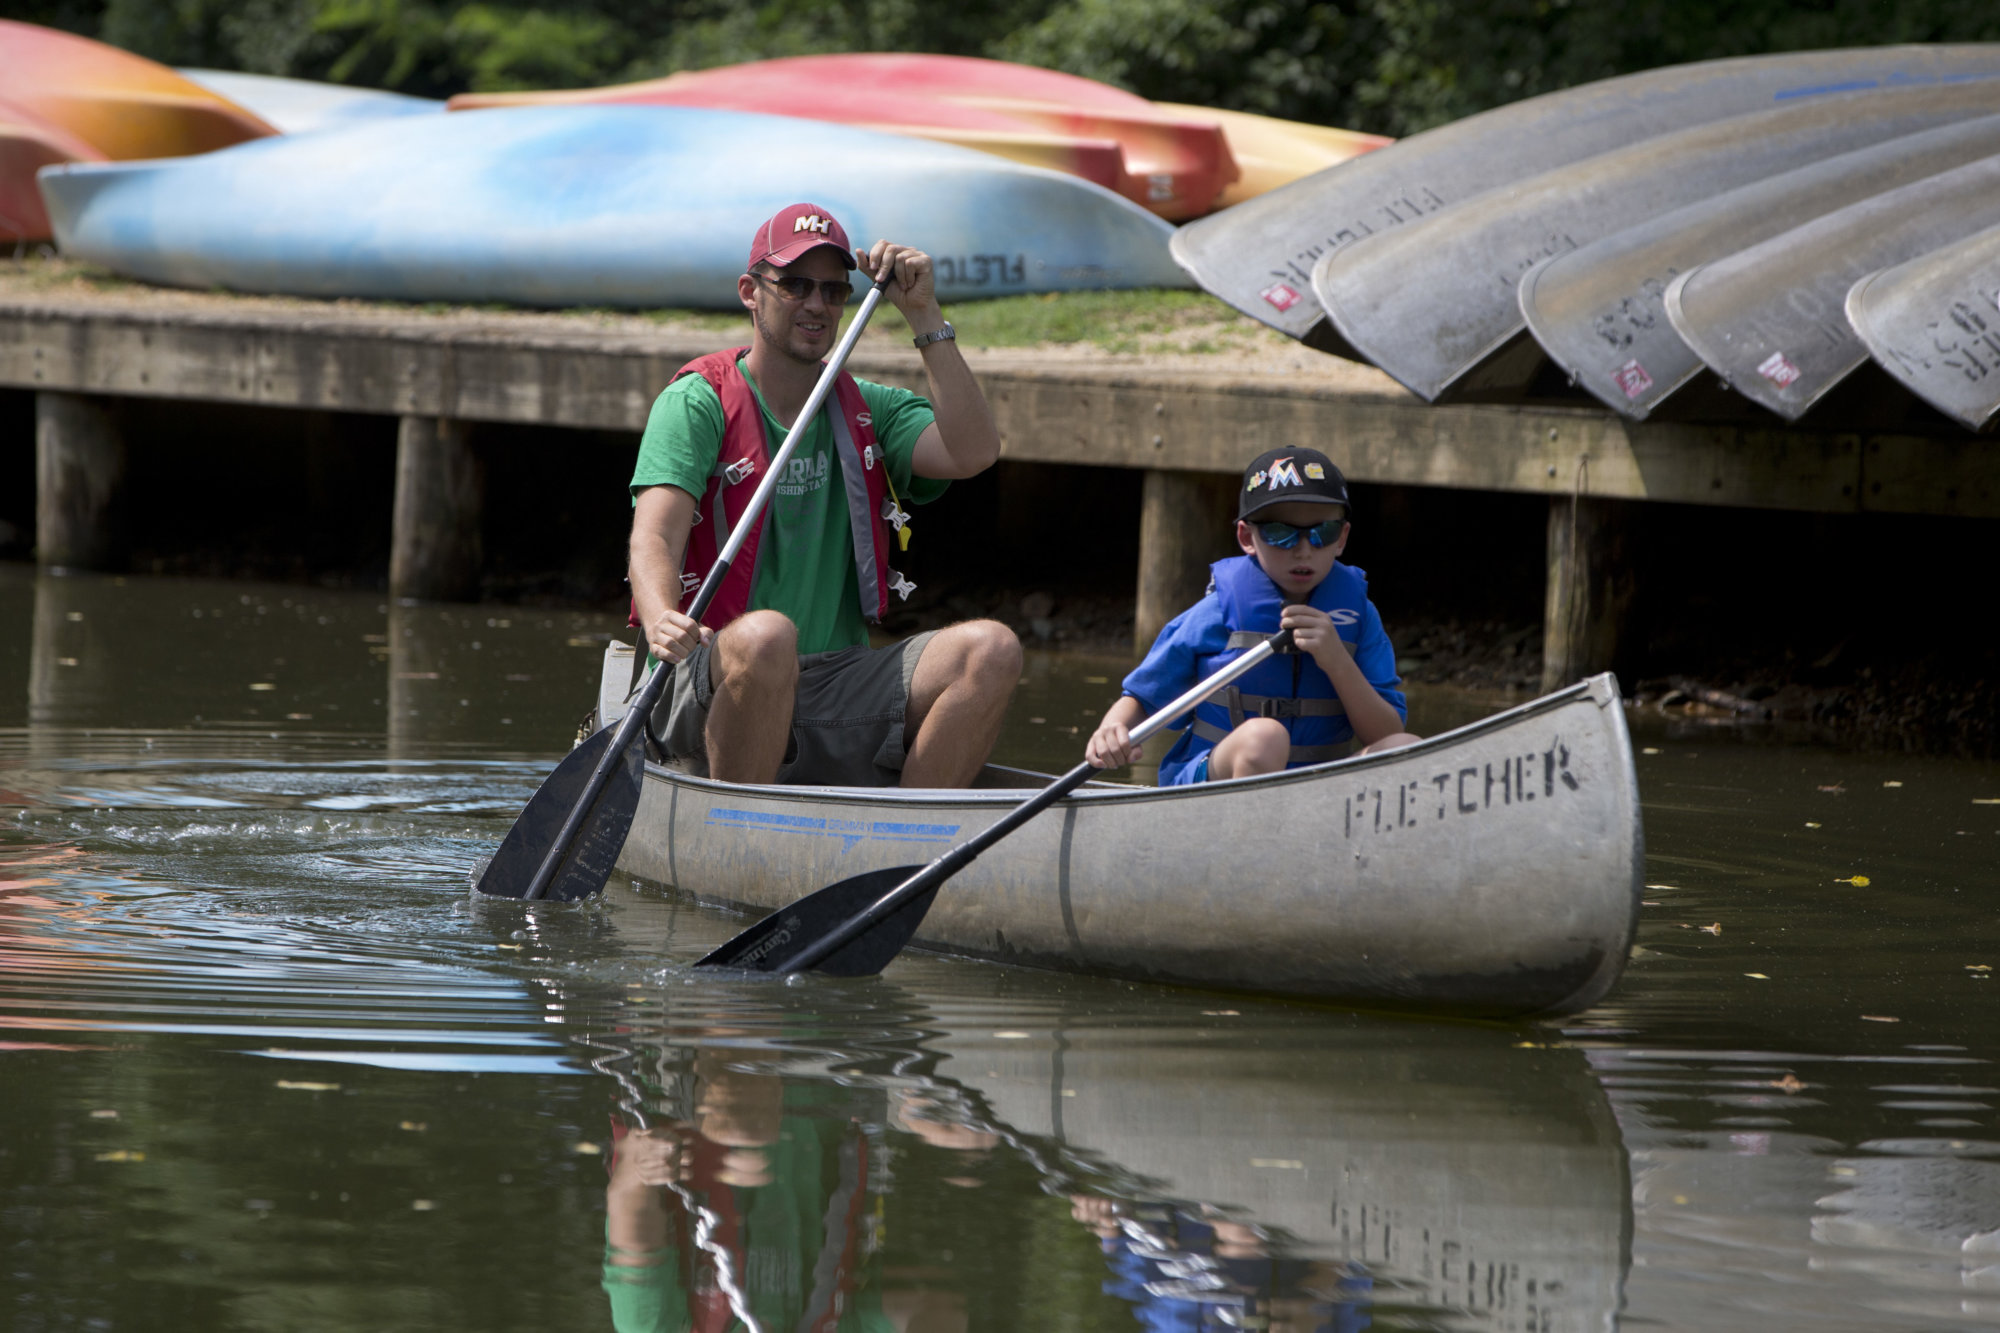 Canoeists paddle into the C &amp; O Canal after launching from the Boathouse at Fletcher's Cove in Washington, Thursday, July 30, 2015. The Boathouse at Fletcher's Cove has rowboats, kayaks, canoes and bicycles for rent. They also sell fishing licenses, bait, tackle and refreshments. You could easily spend a whole visit to Washington exploring the museums, galleries and monuments along the National Mall.   (AP Photo/Carolyn Kaster)